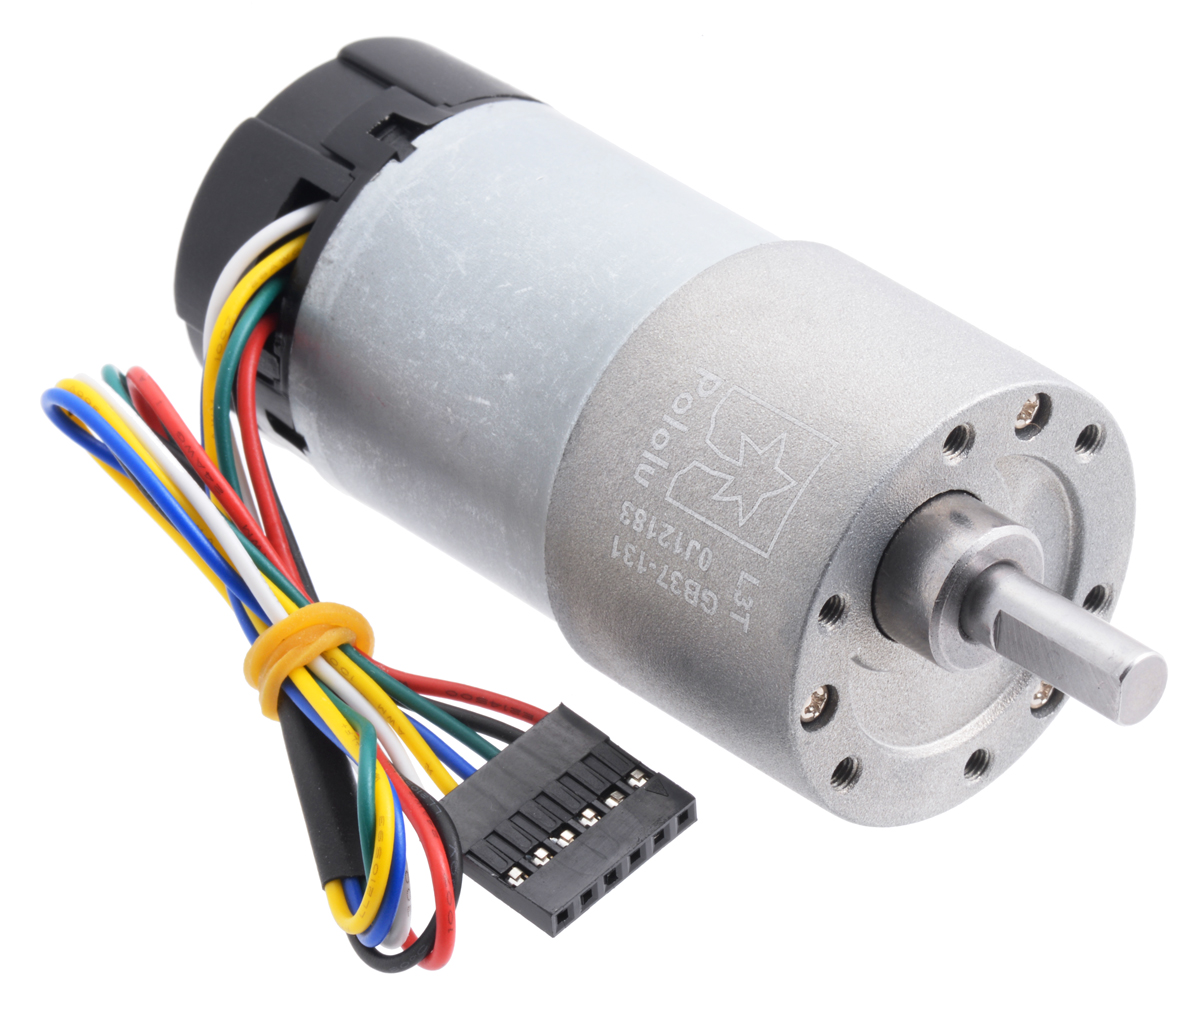 131:1 Metal Gearmotor 37Dx73L mm 12V with 64 CPR Encoder (Helical Pinion)